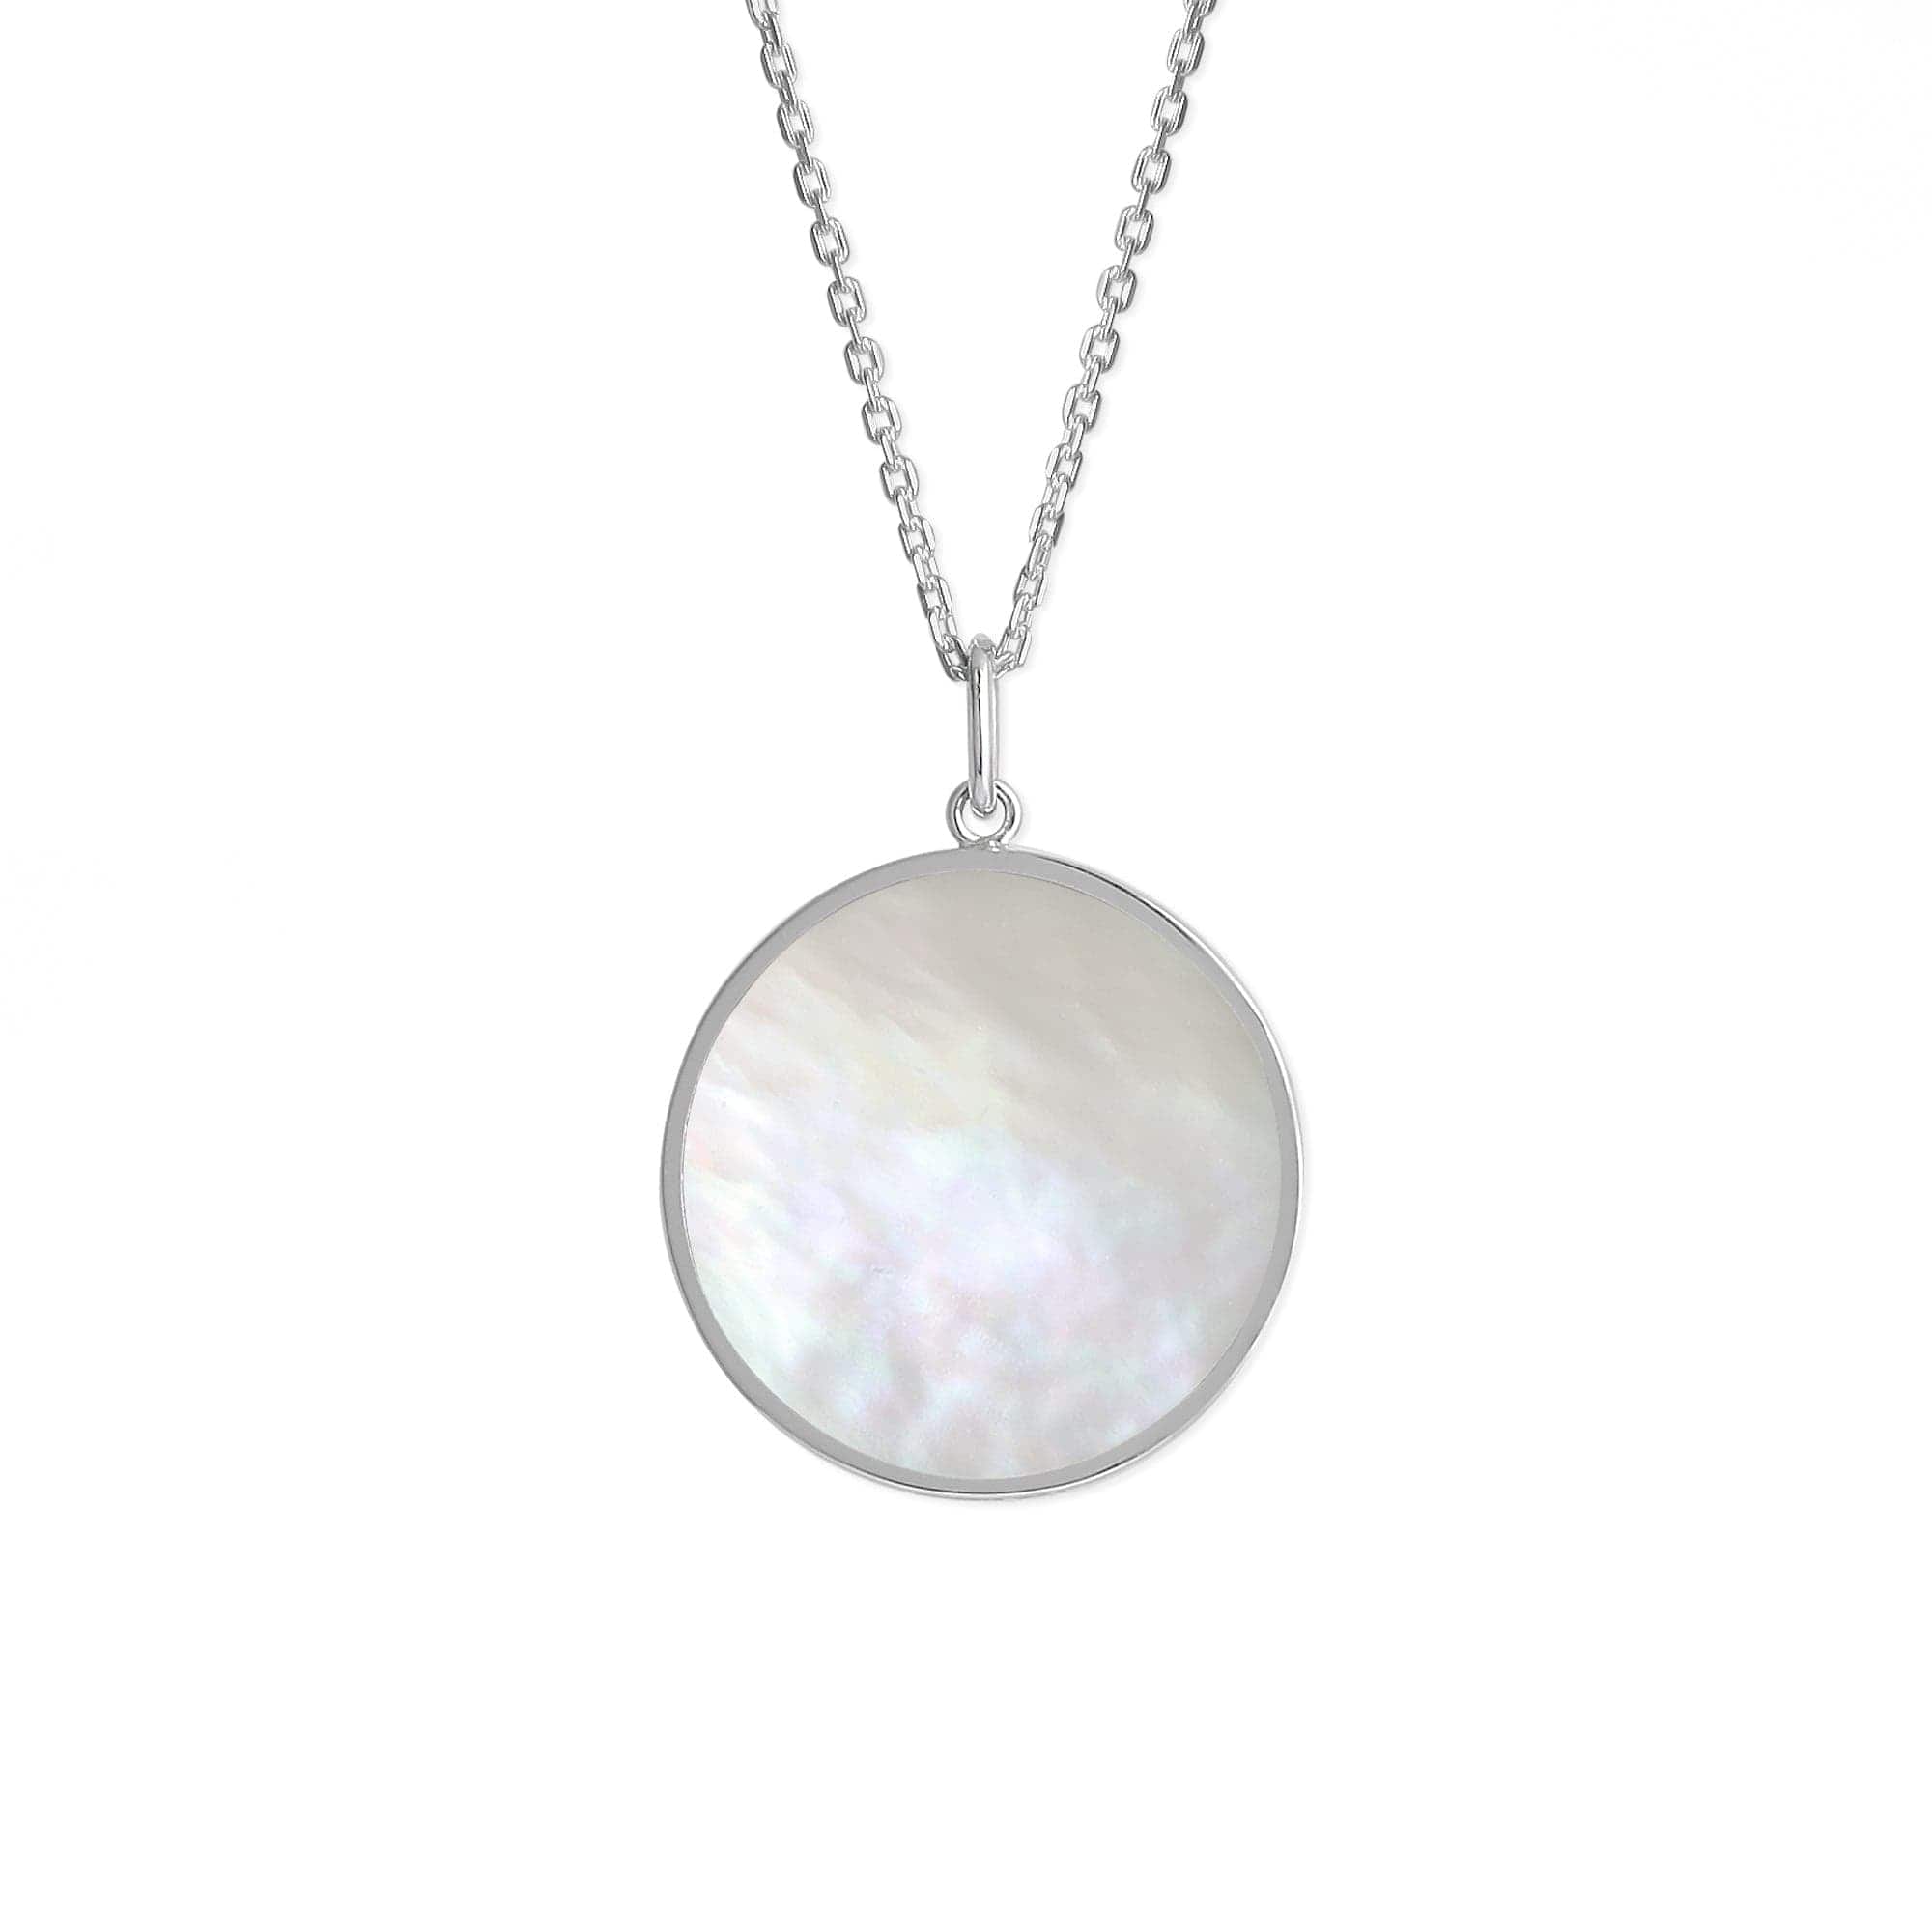 Boma Jewelry Necklaces Mother of Pearl Alina Circle Bezel Pendant Necklace with Stone